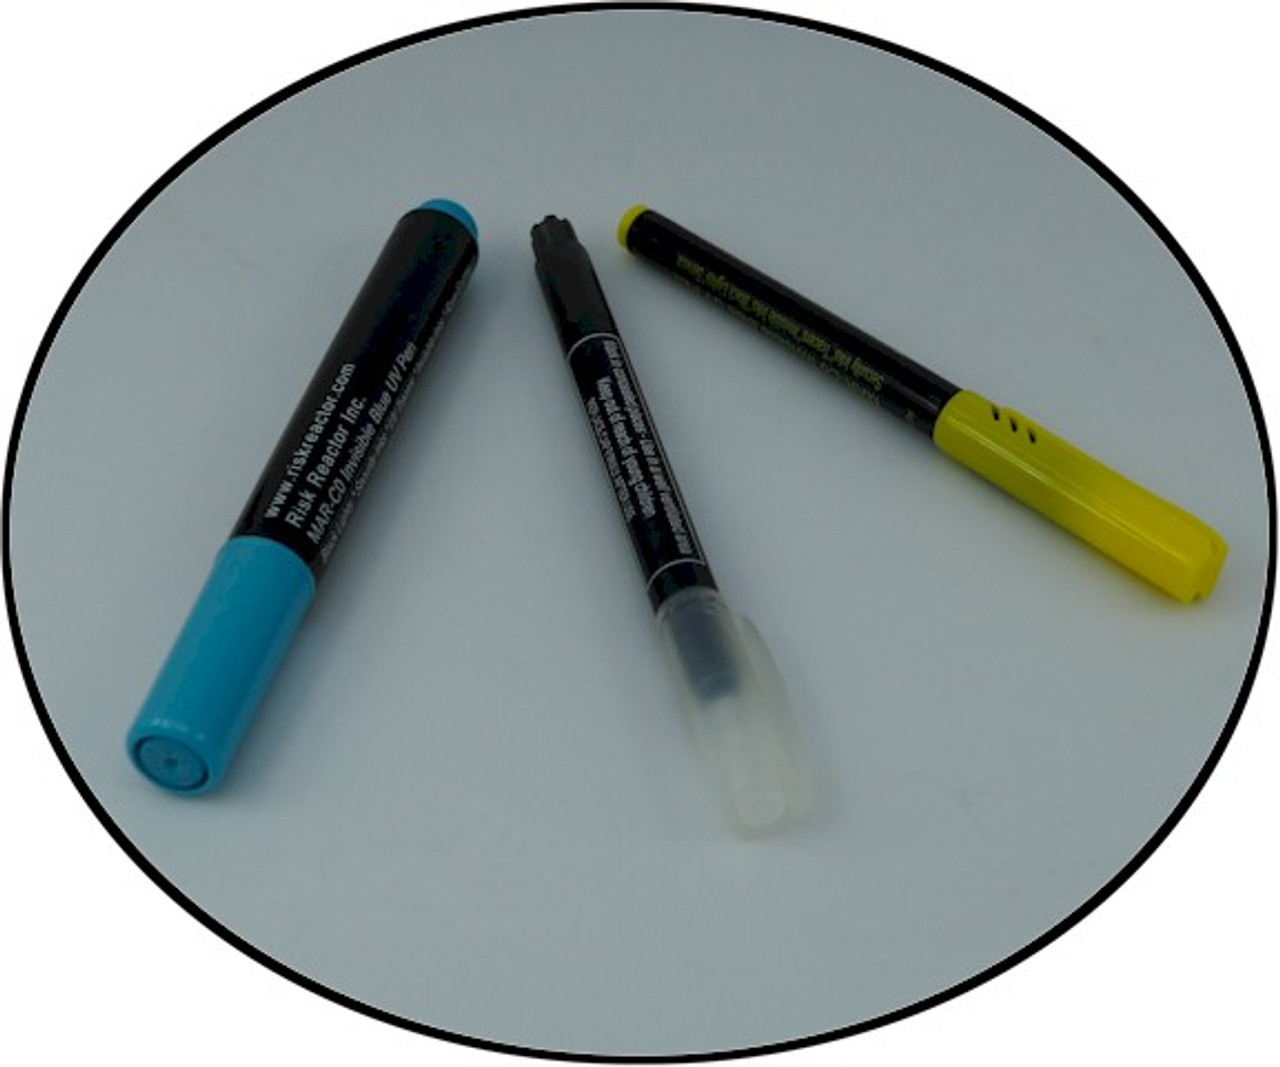 Dual clear uv blue pen and black marker